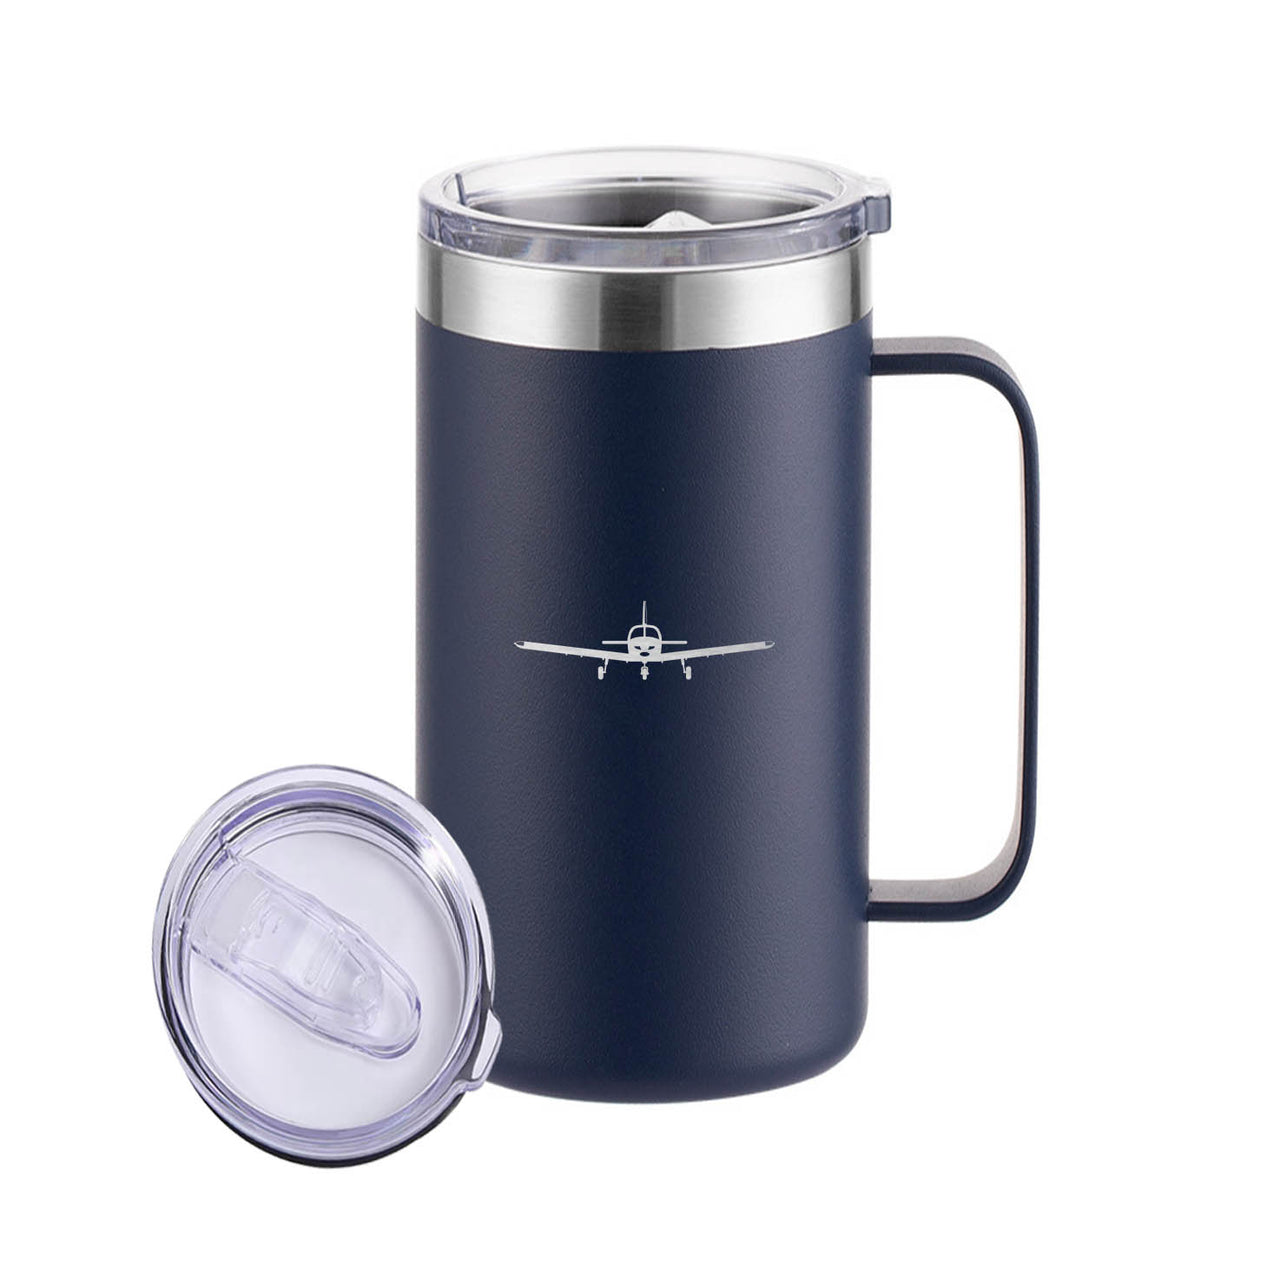 Piper PA28 Silhouette Plane Designed Stainless Steel Beer Mugs